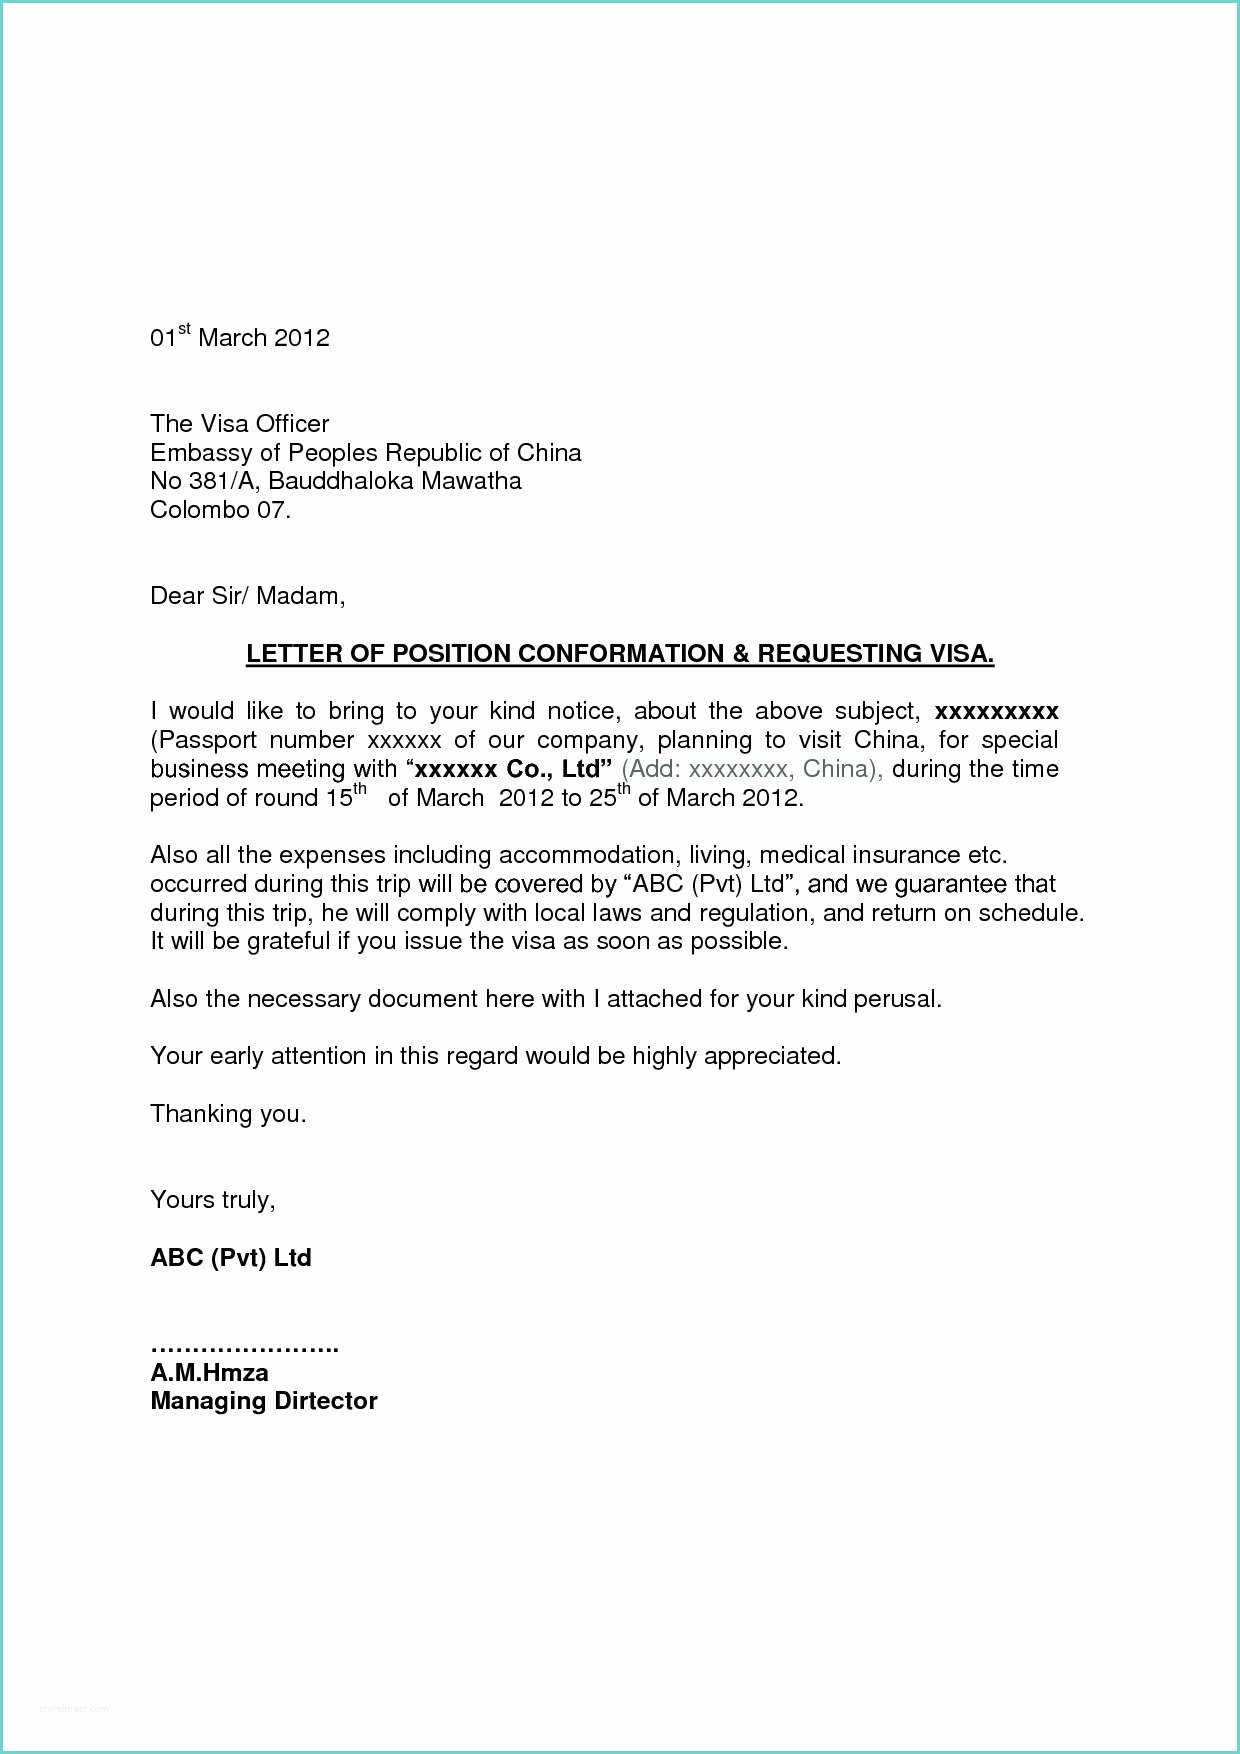 Sample Accommodation Request Letter Ac Modation Request Letter to Pany Sample